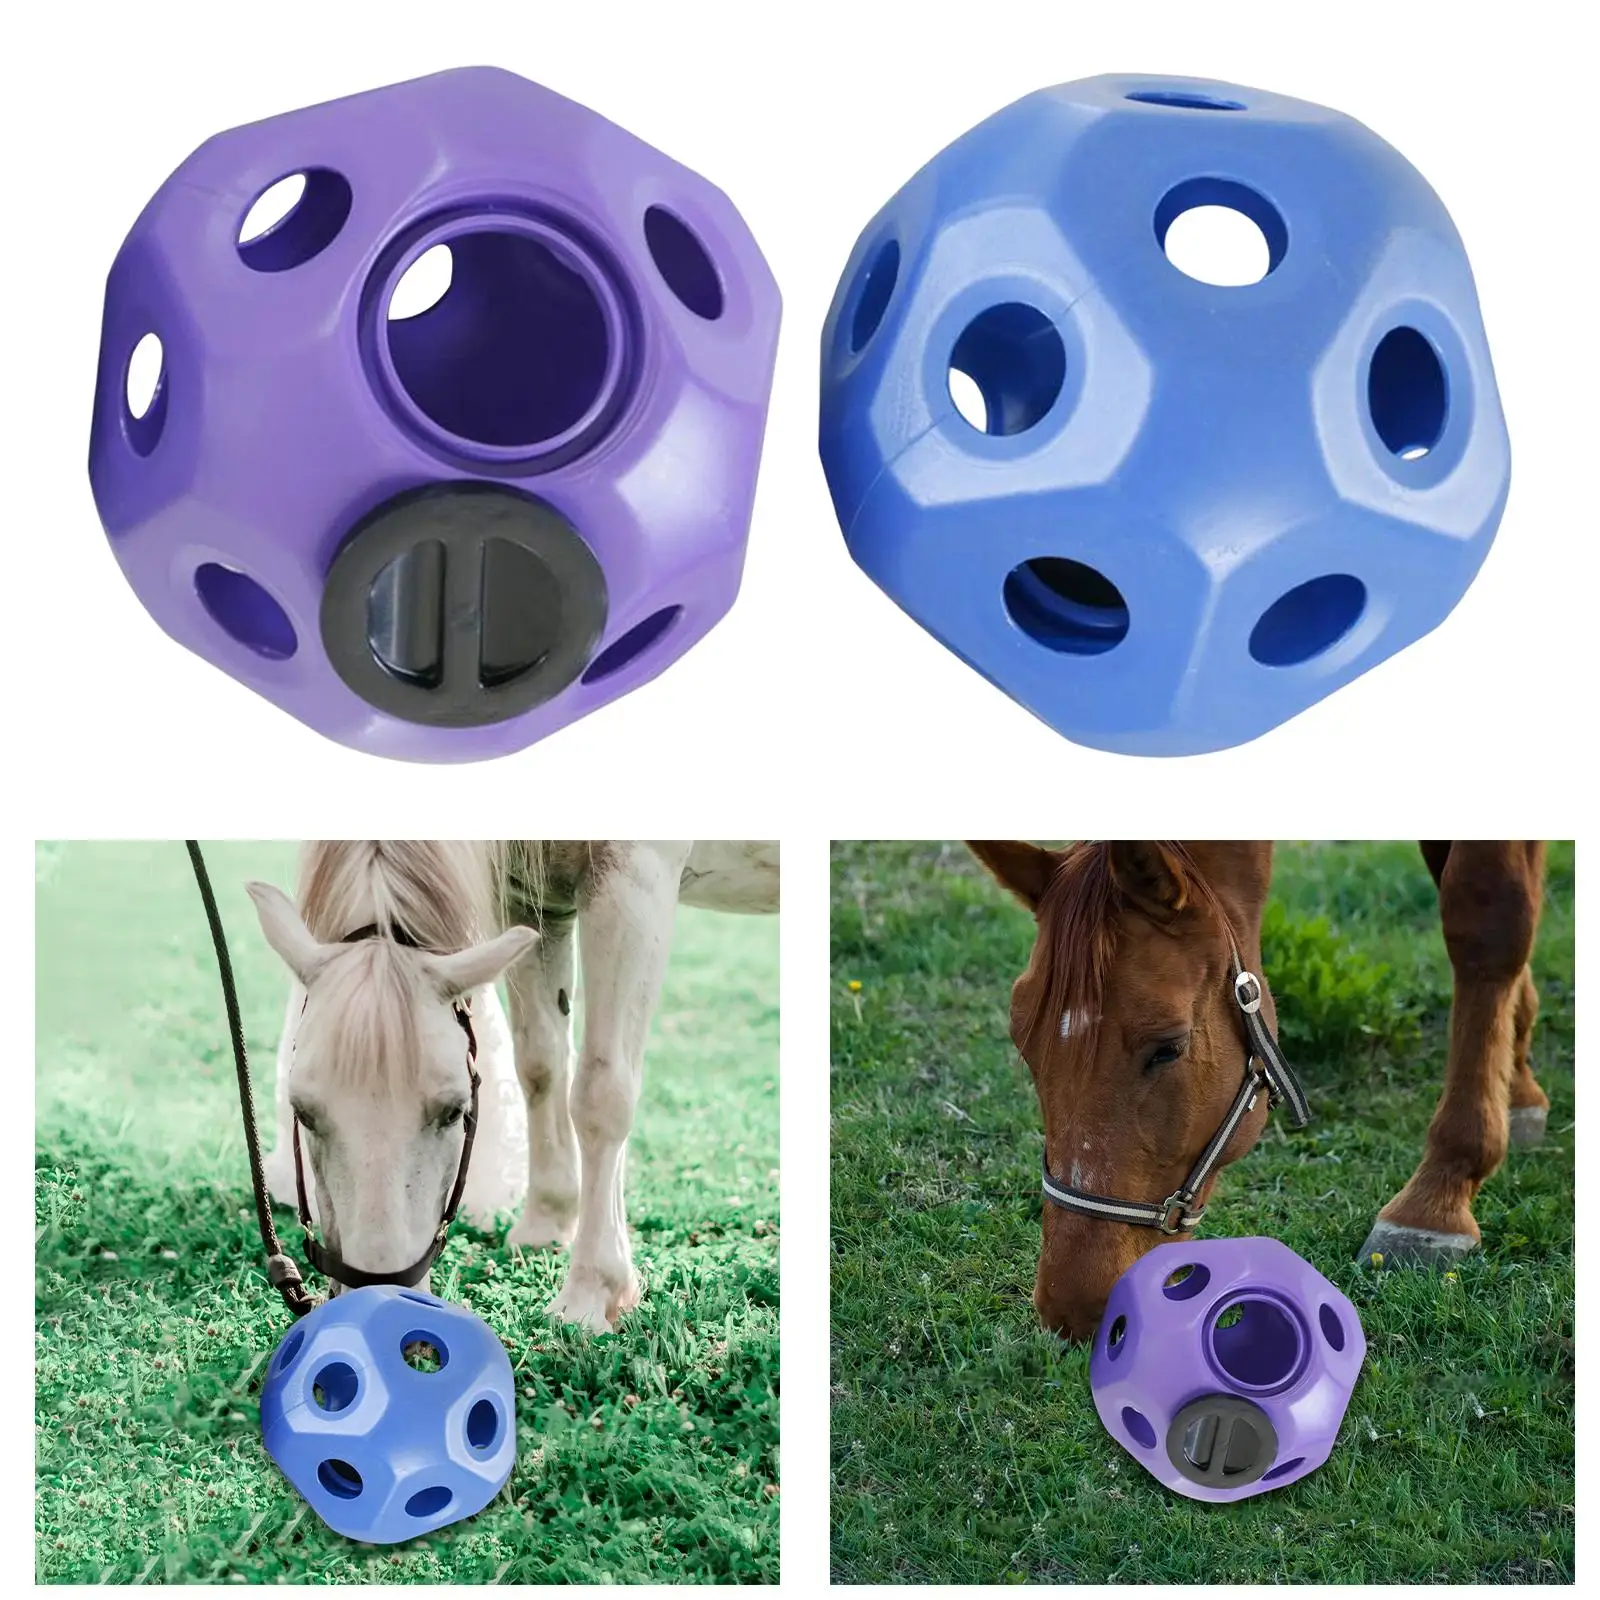 Fun Horse Treat Ball Slow Feed Hay Ball Hay Feeding Toy Hay Feeder Ball Horse Feeder Toys for Horse Stable Stall Trailer Rest